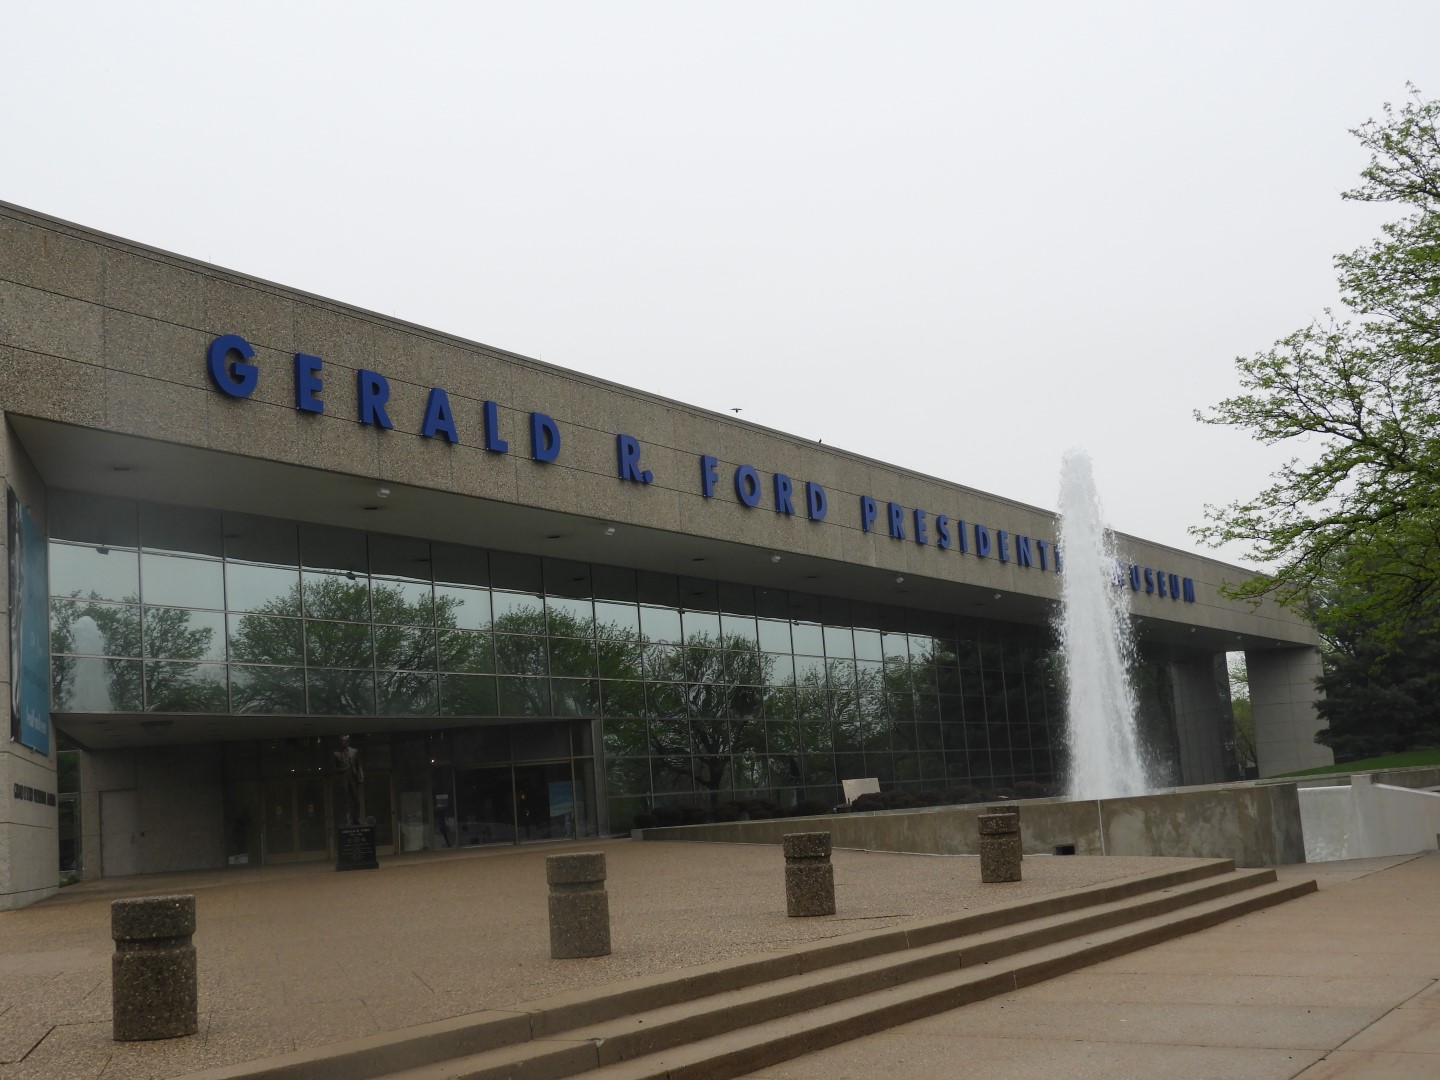 Gerald Ford museum  1 of 1 (#ford_museum_grand_rapids)